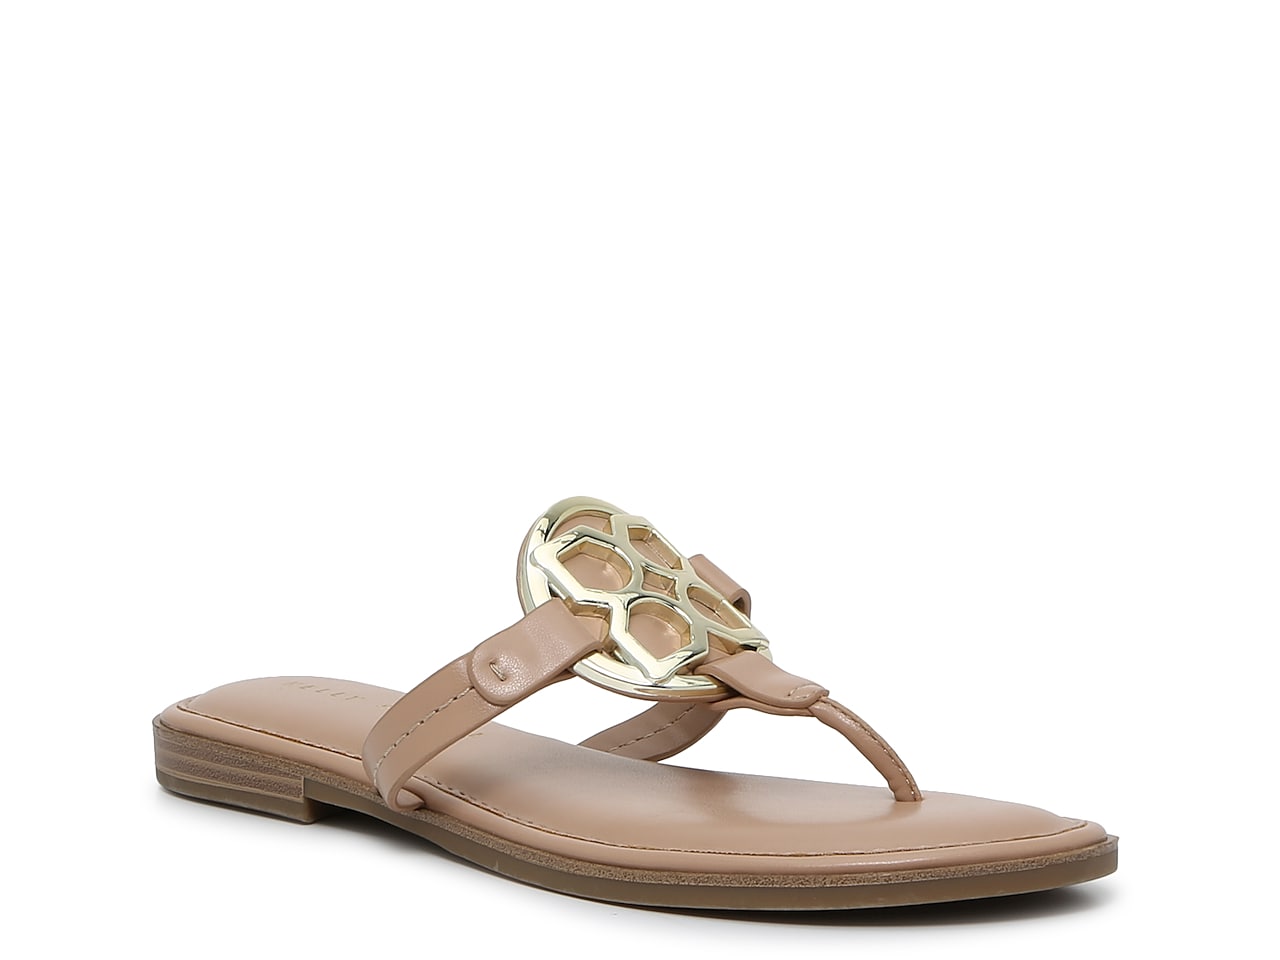 Tory Burch Sandal Look Alikes | Splurge VS Steal | Lillies and Lashes